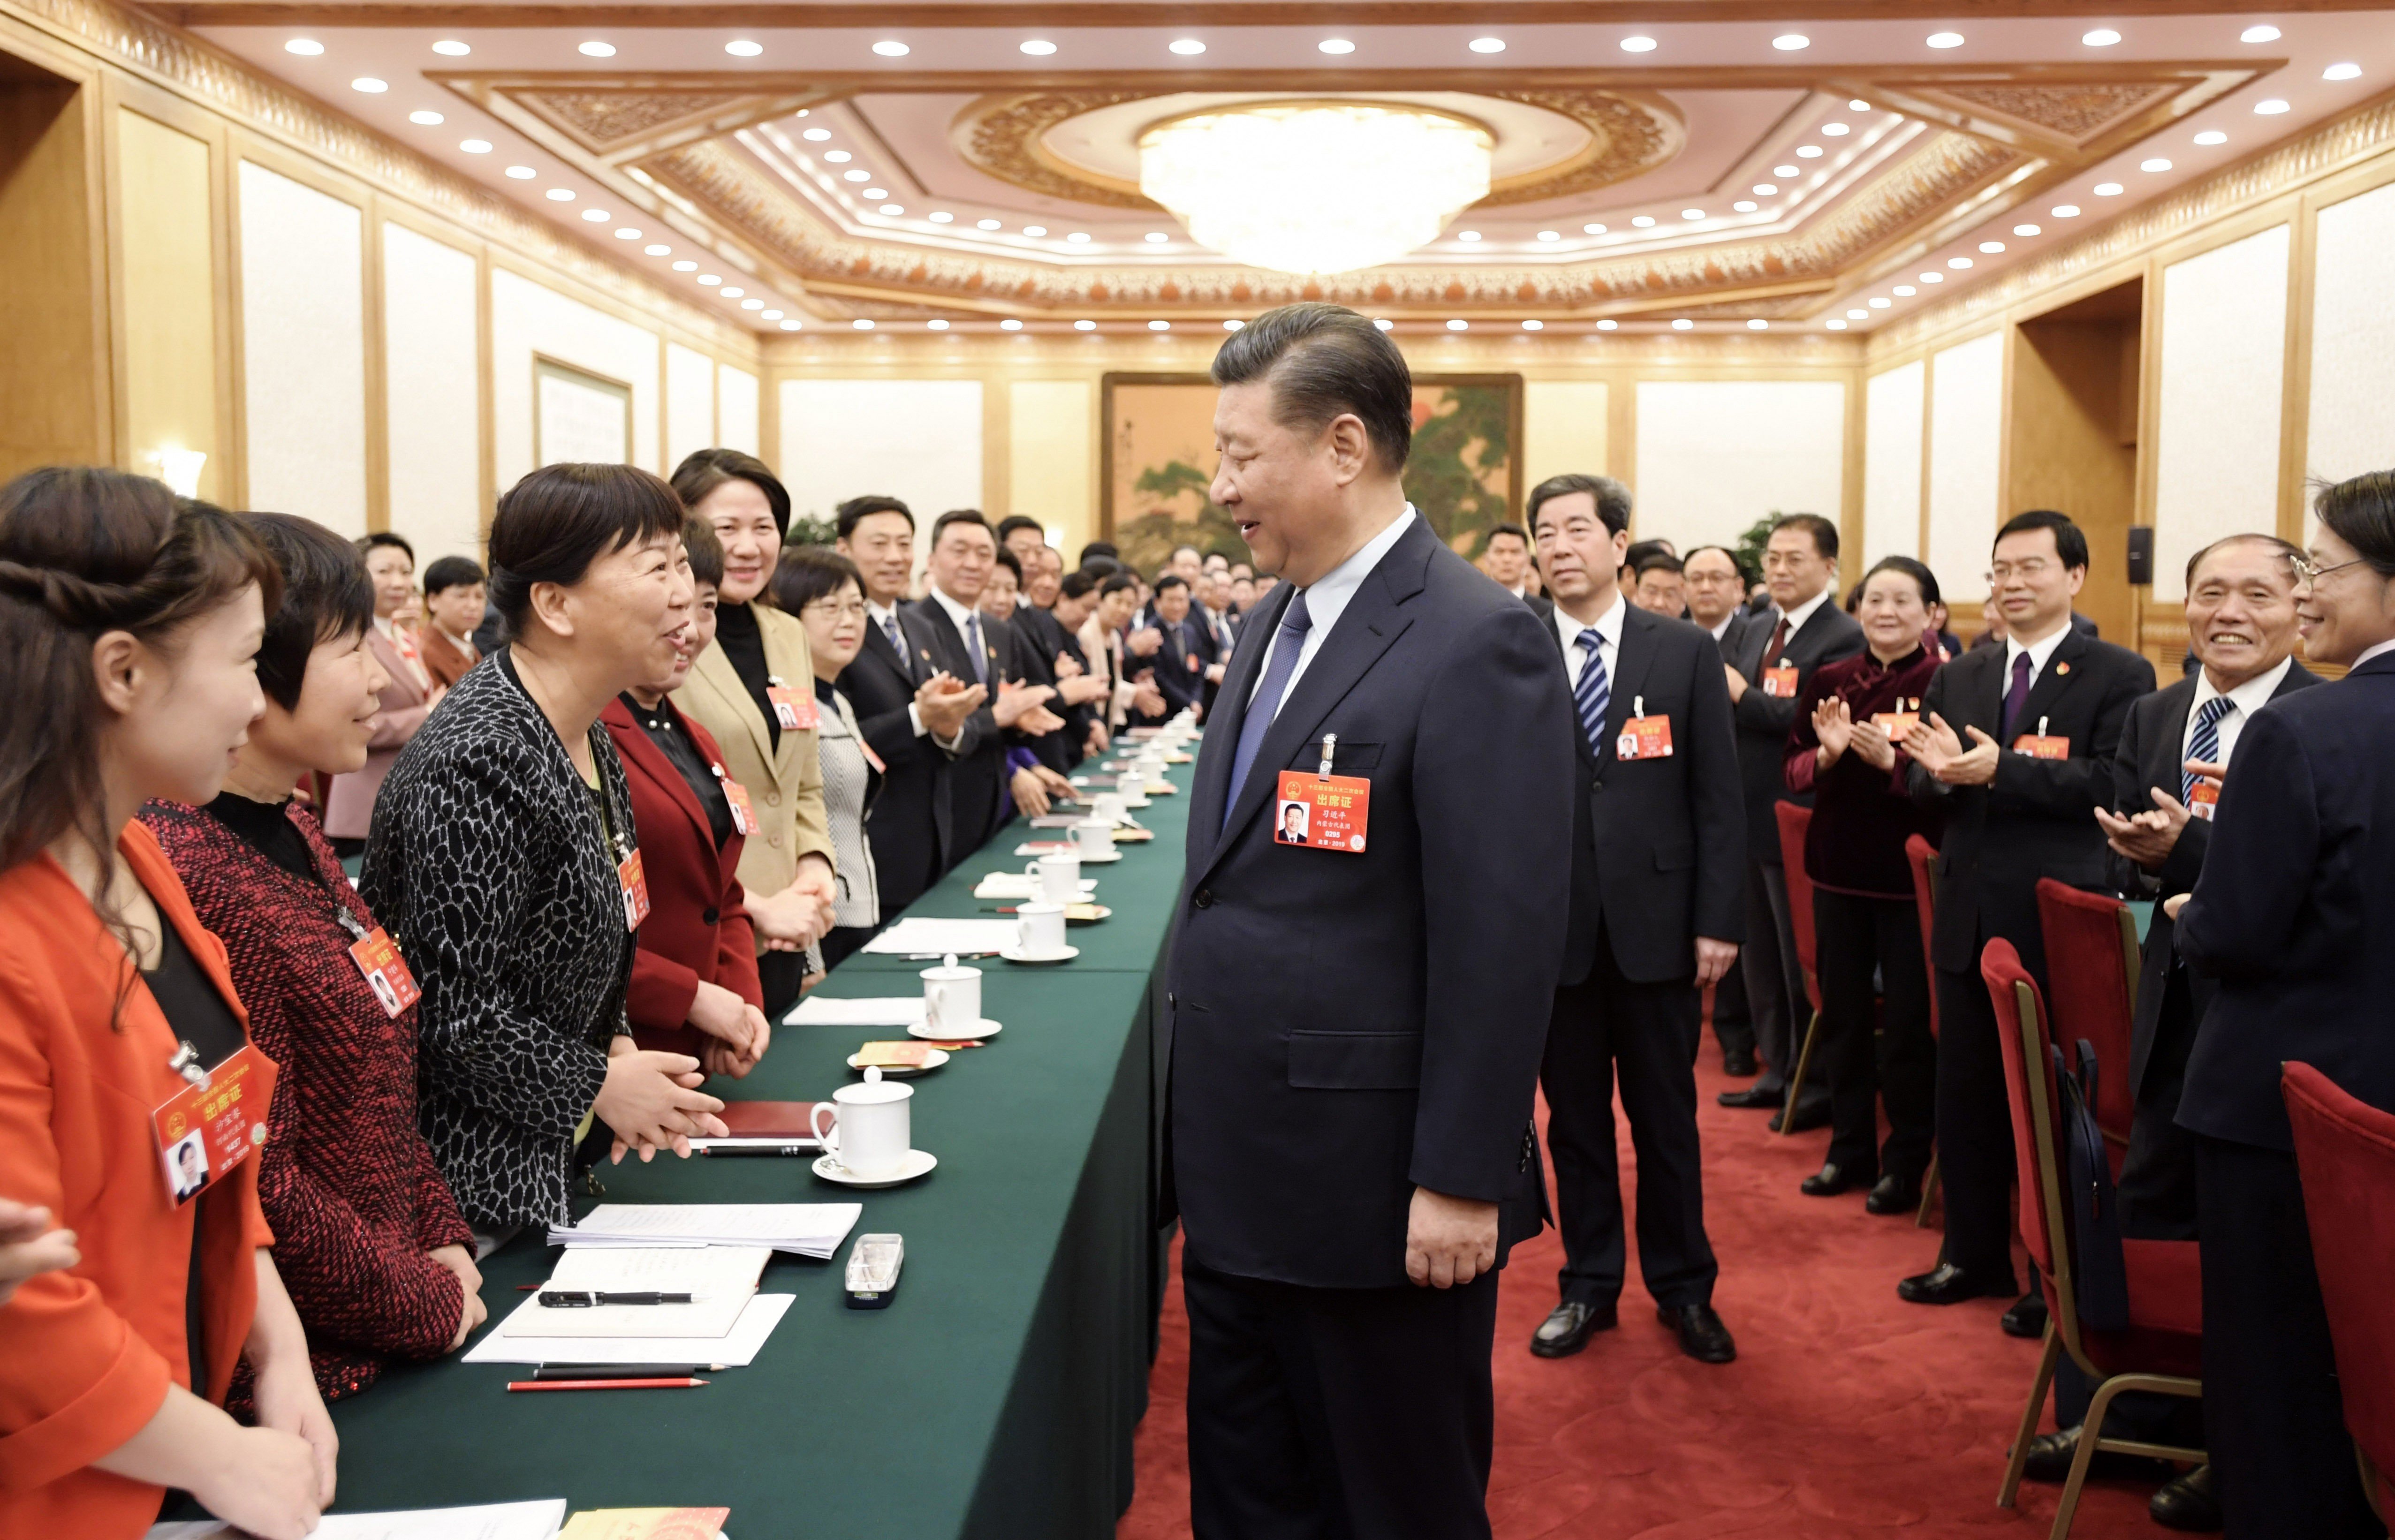 President Xi Jinping stops to talk to National People’s Congress deputies during a session of the annual meeting on March 8, in Beijing. Xi is determined that China must continue to champion globalisation. Photo: Xinhua